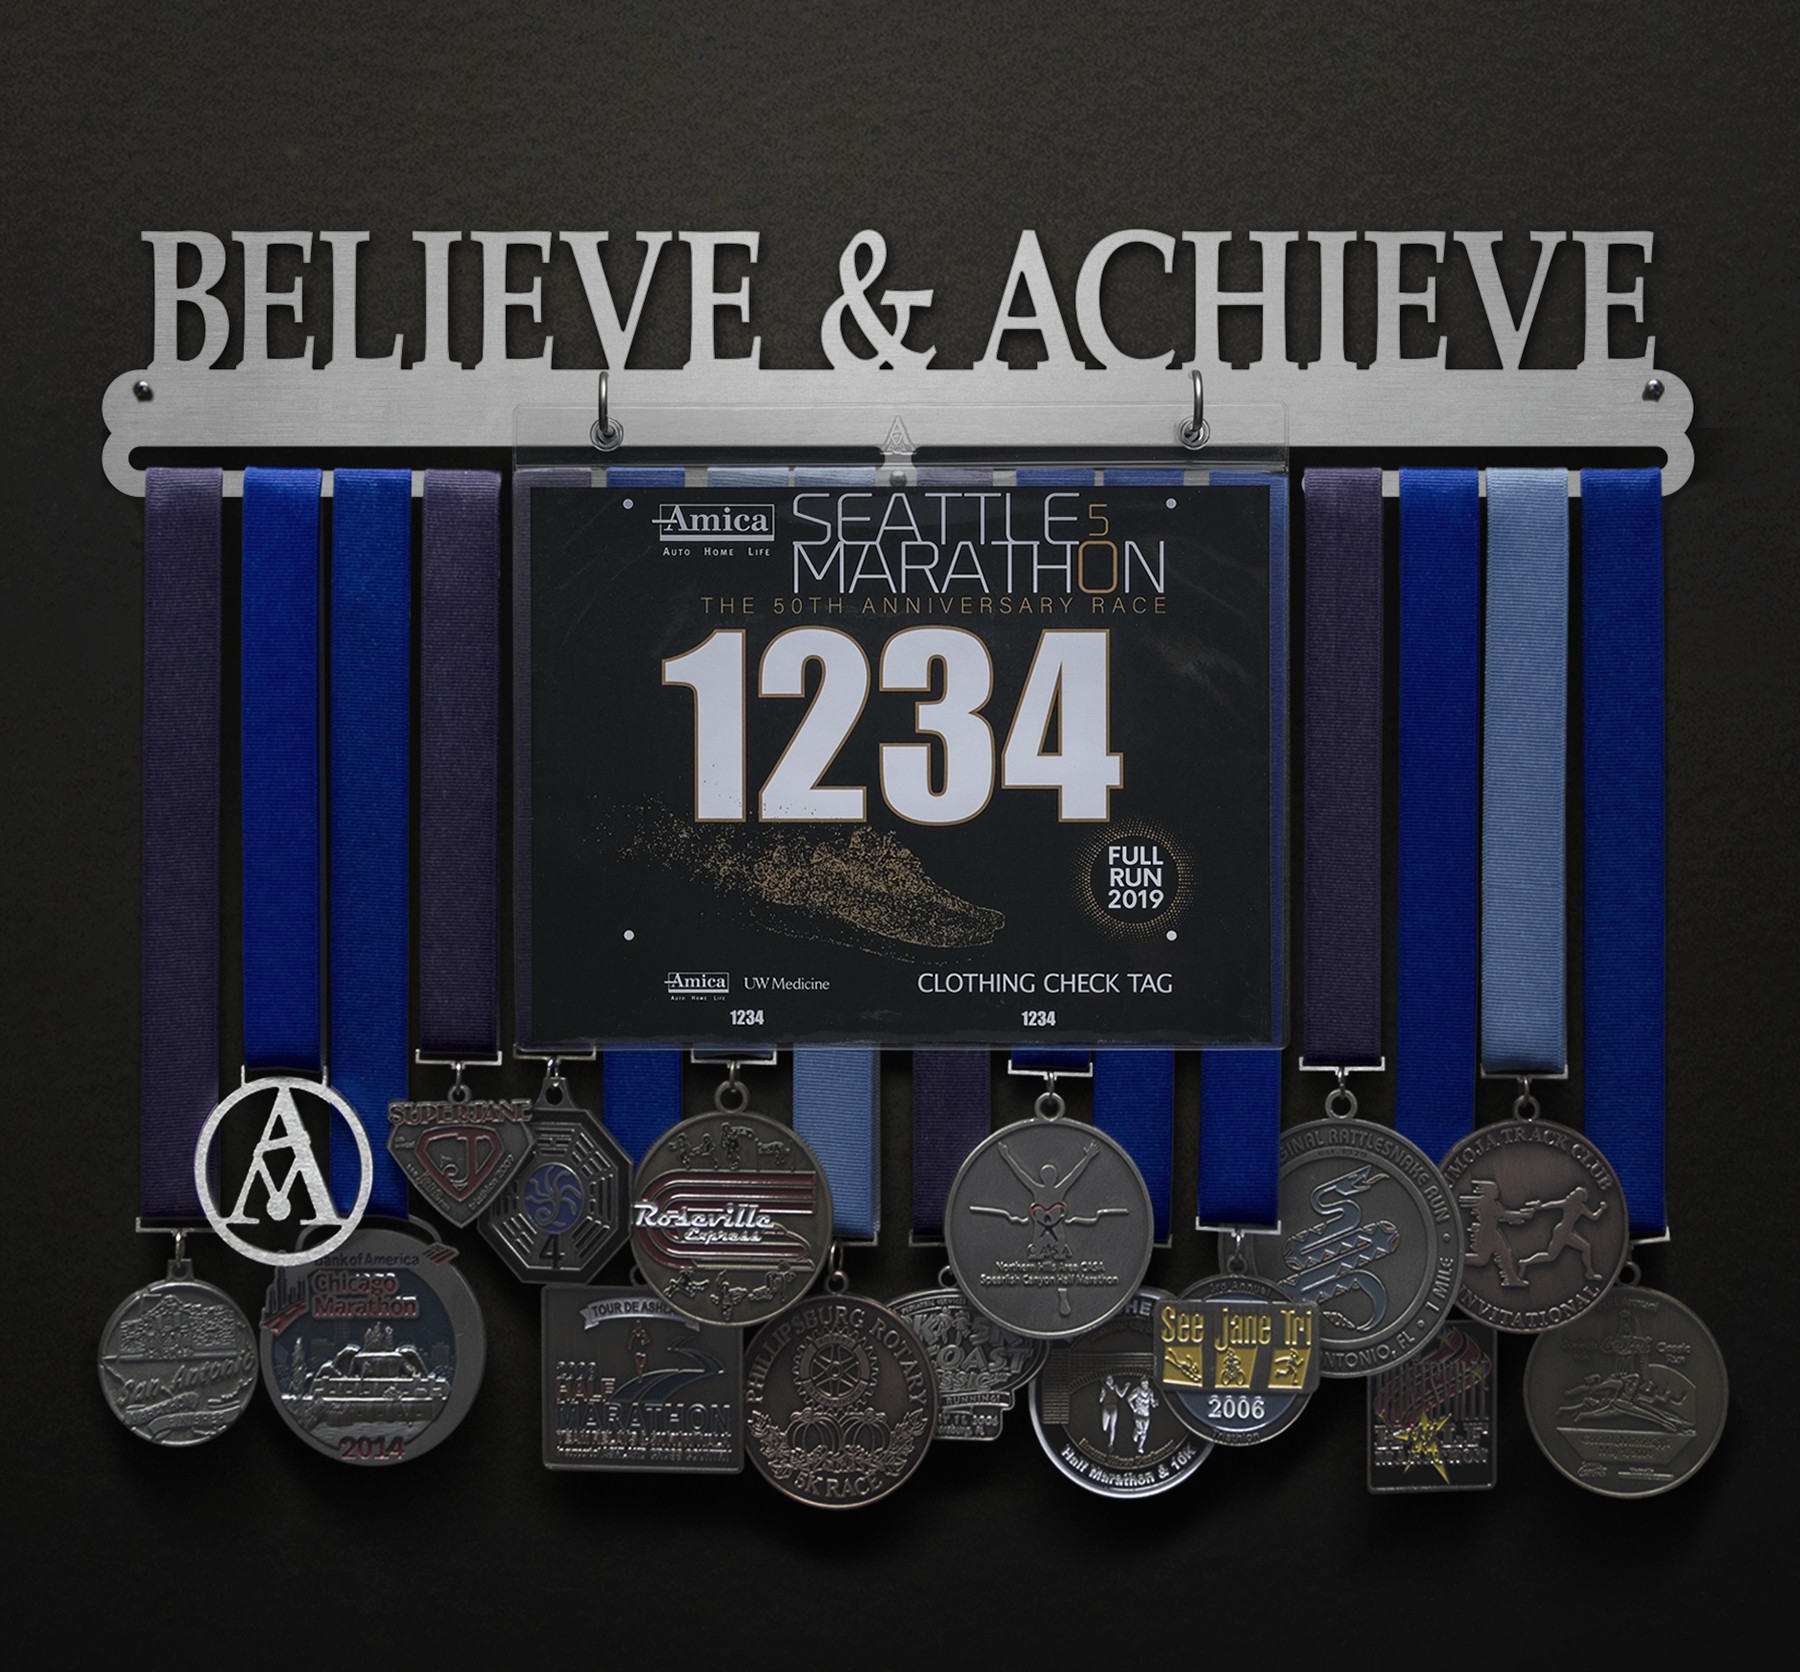 Believe and Achieve Bib and Medal Display